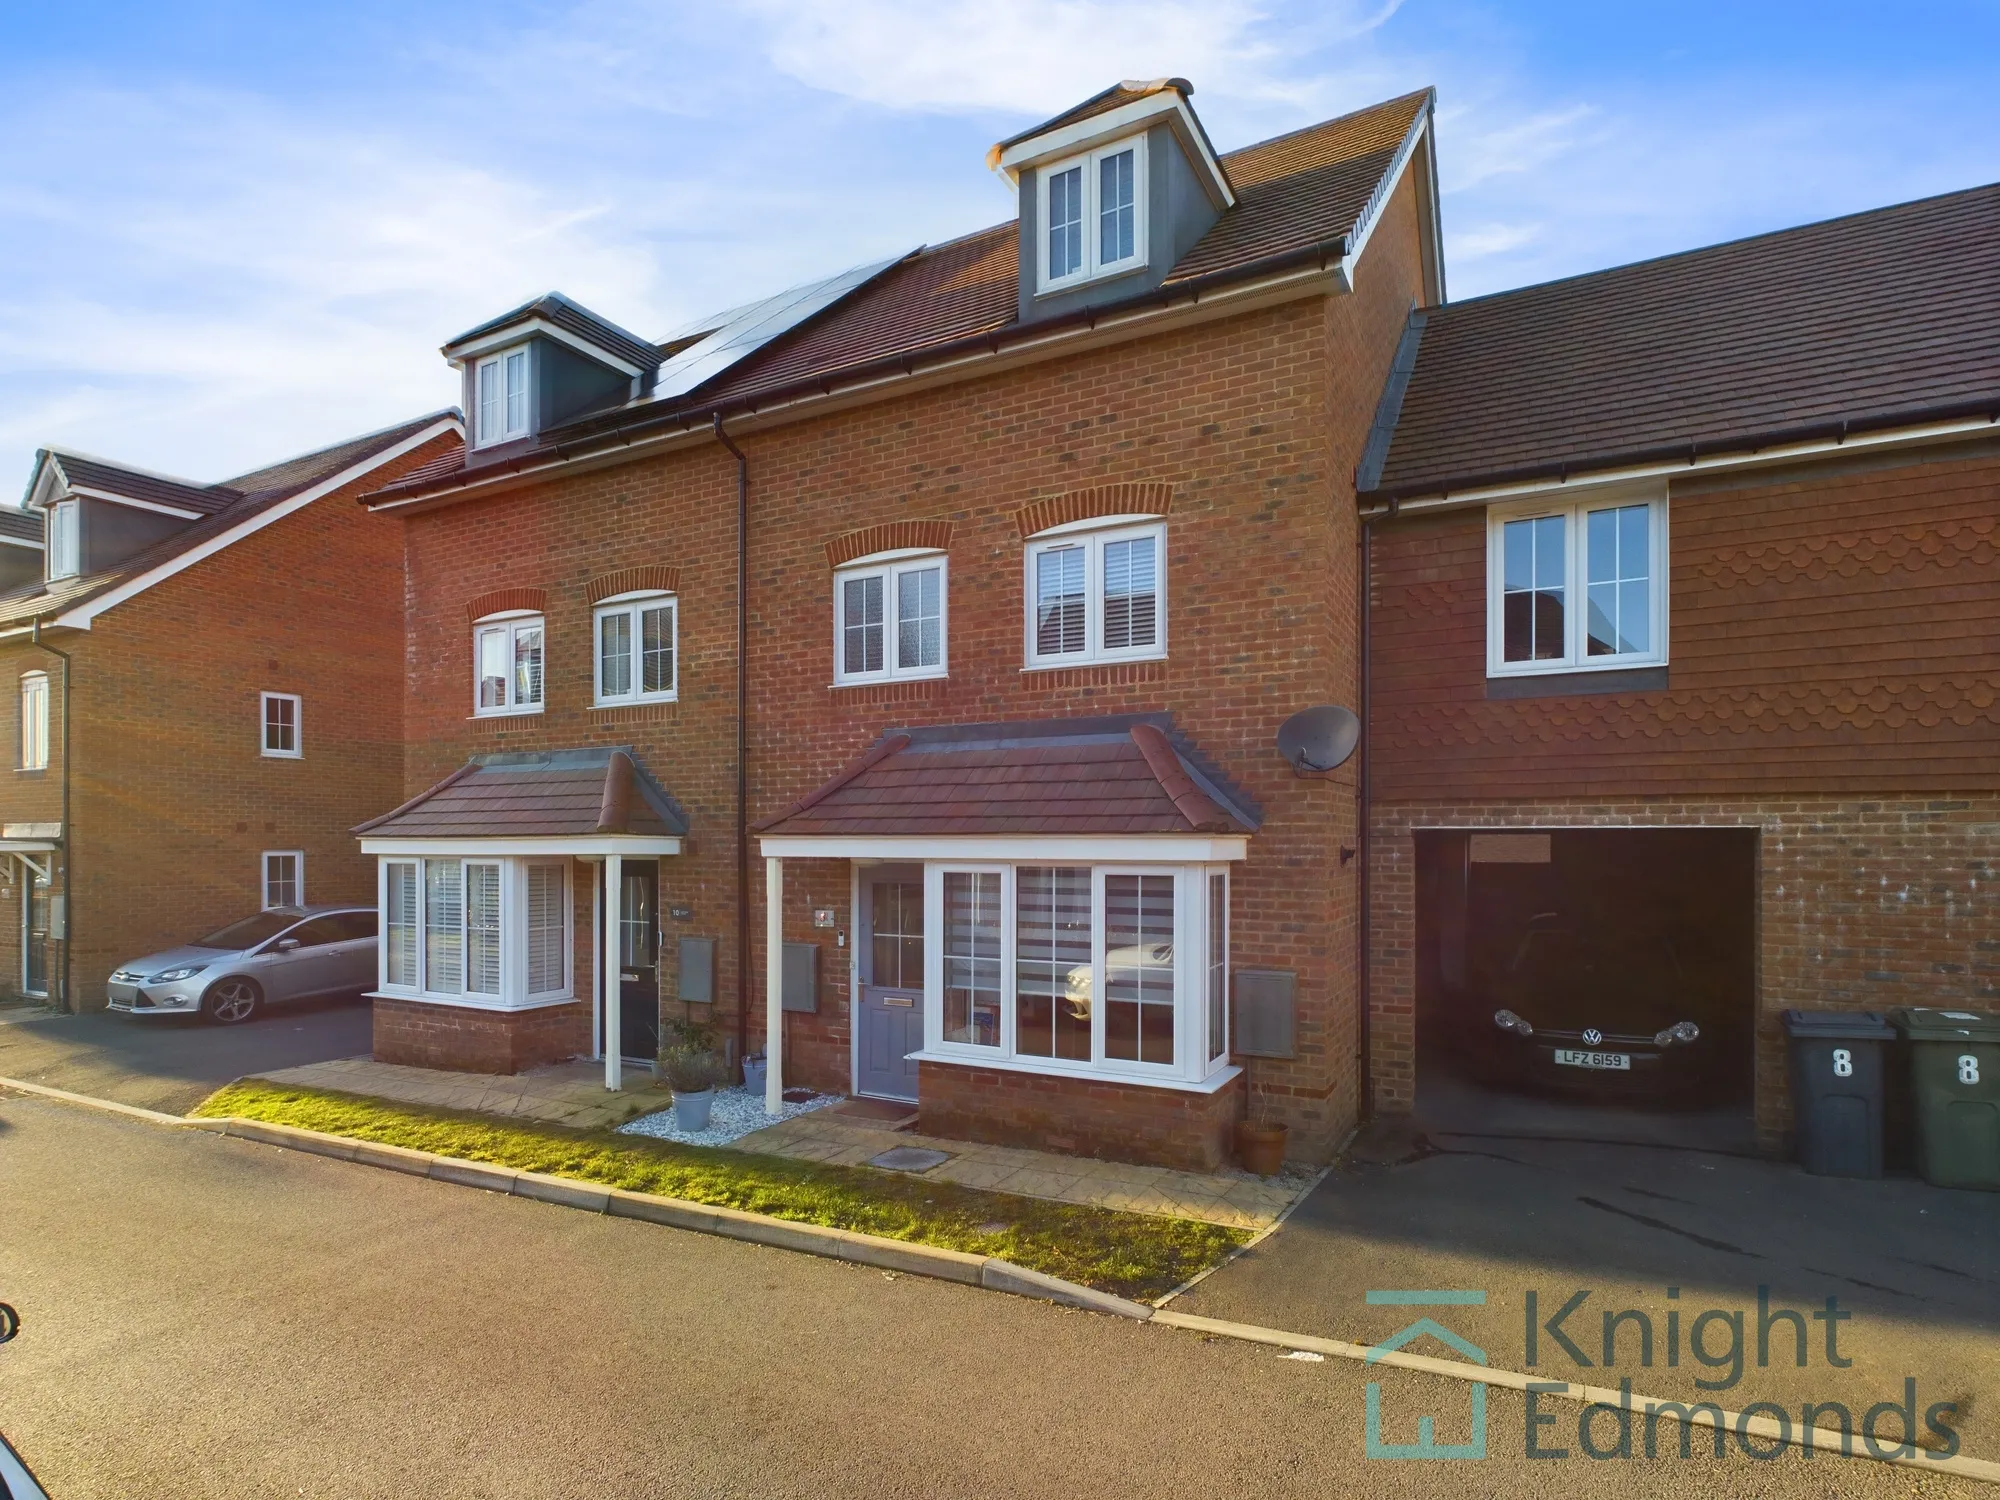 4 bed terraced house for sale in Matthews Avenue, Maidstone - Property Image 1